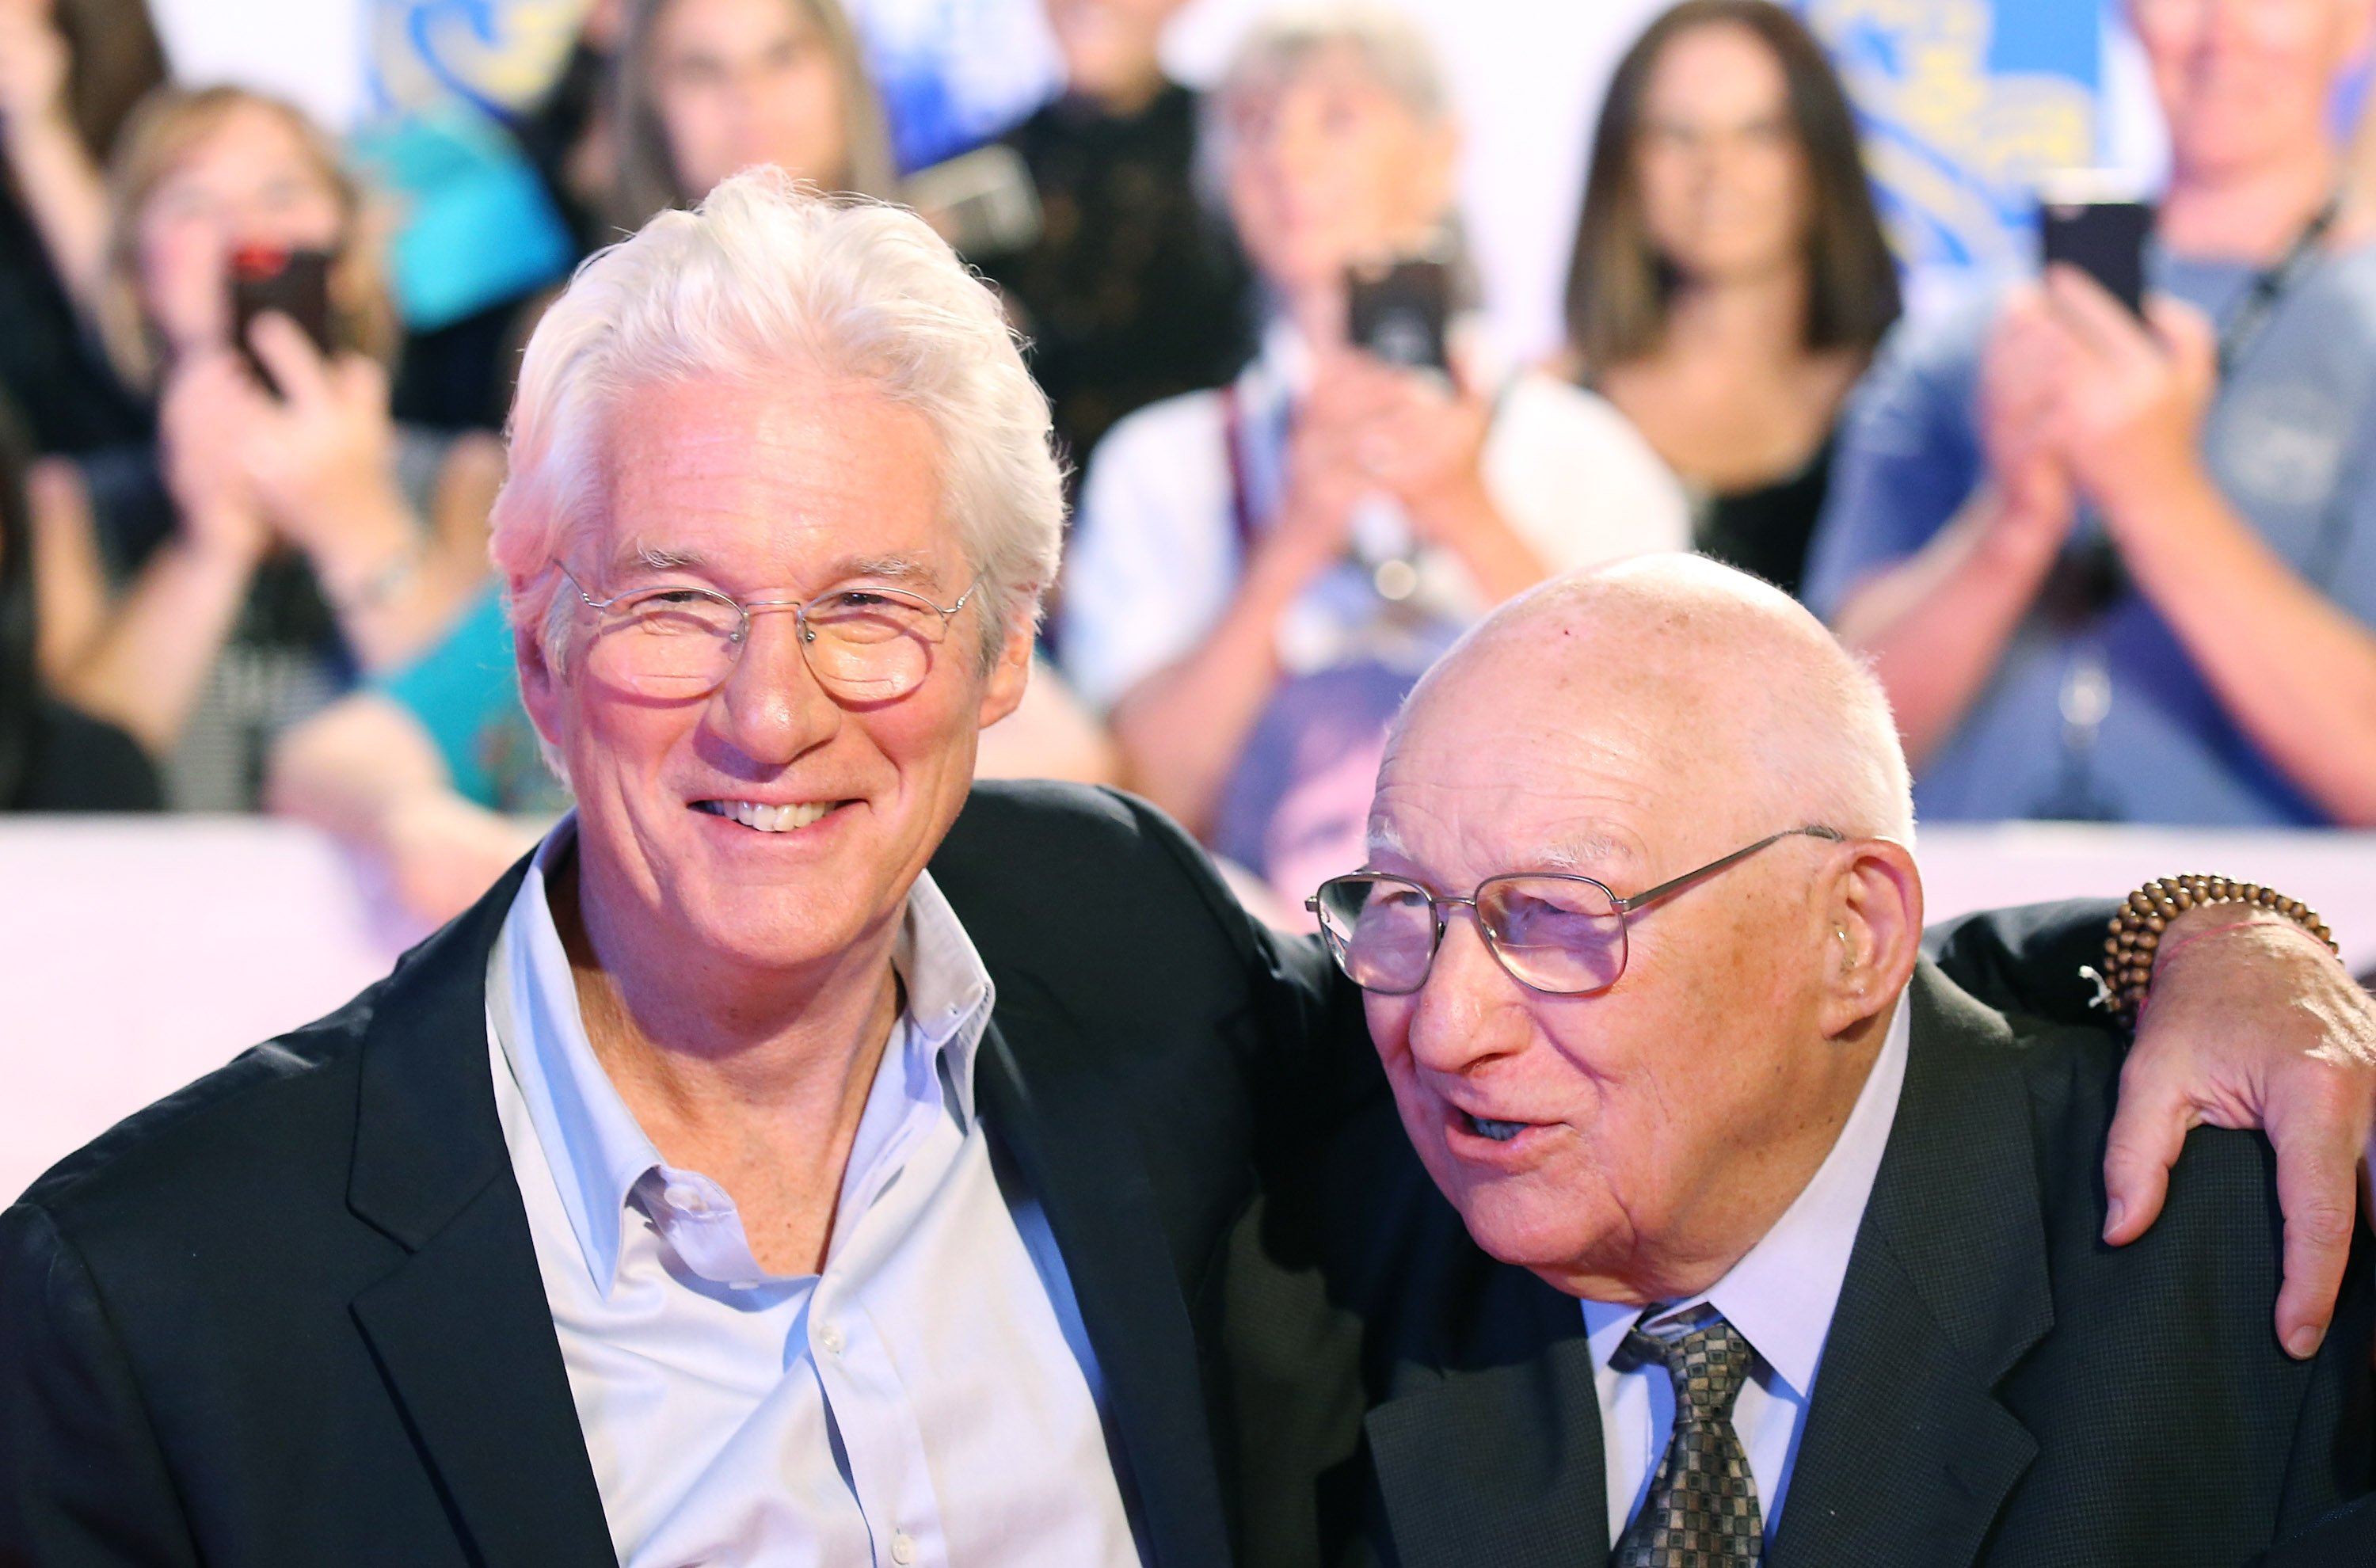 Richard Gere and his father, Homer George Gere at the "Three Christs" premiere - 2017 TIFF - Premieres, Photo Calls and Press Conferences held on September 14, 2017 in Toronto, Canada. | Source: Getty Images